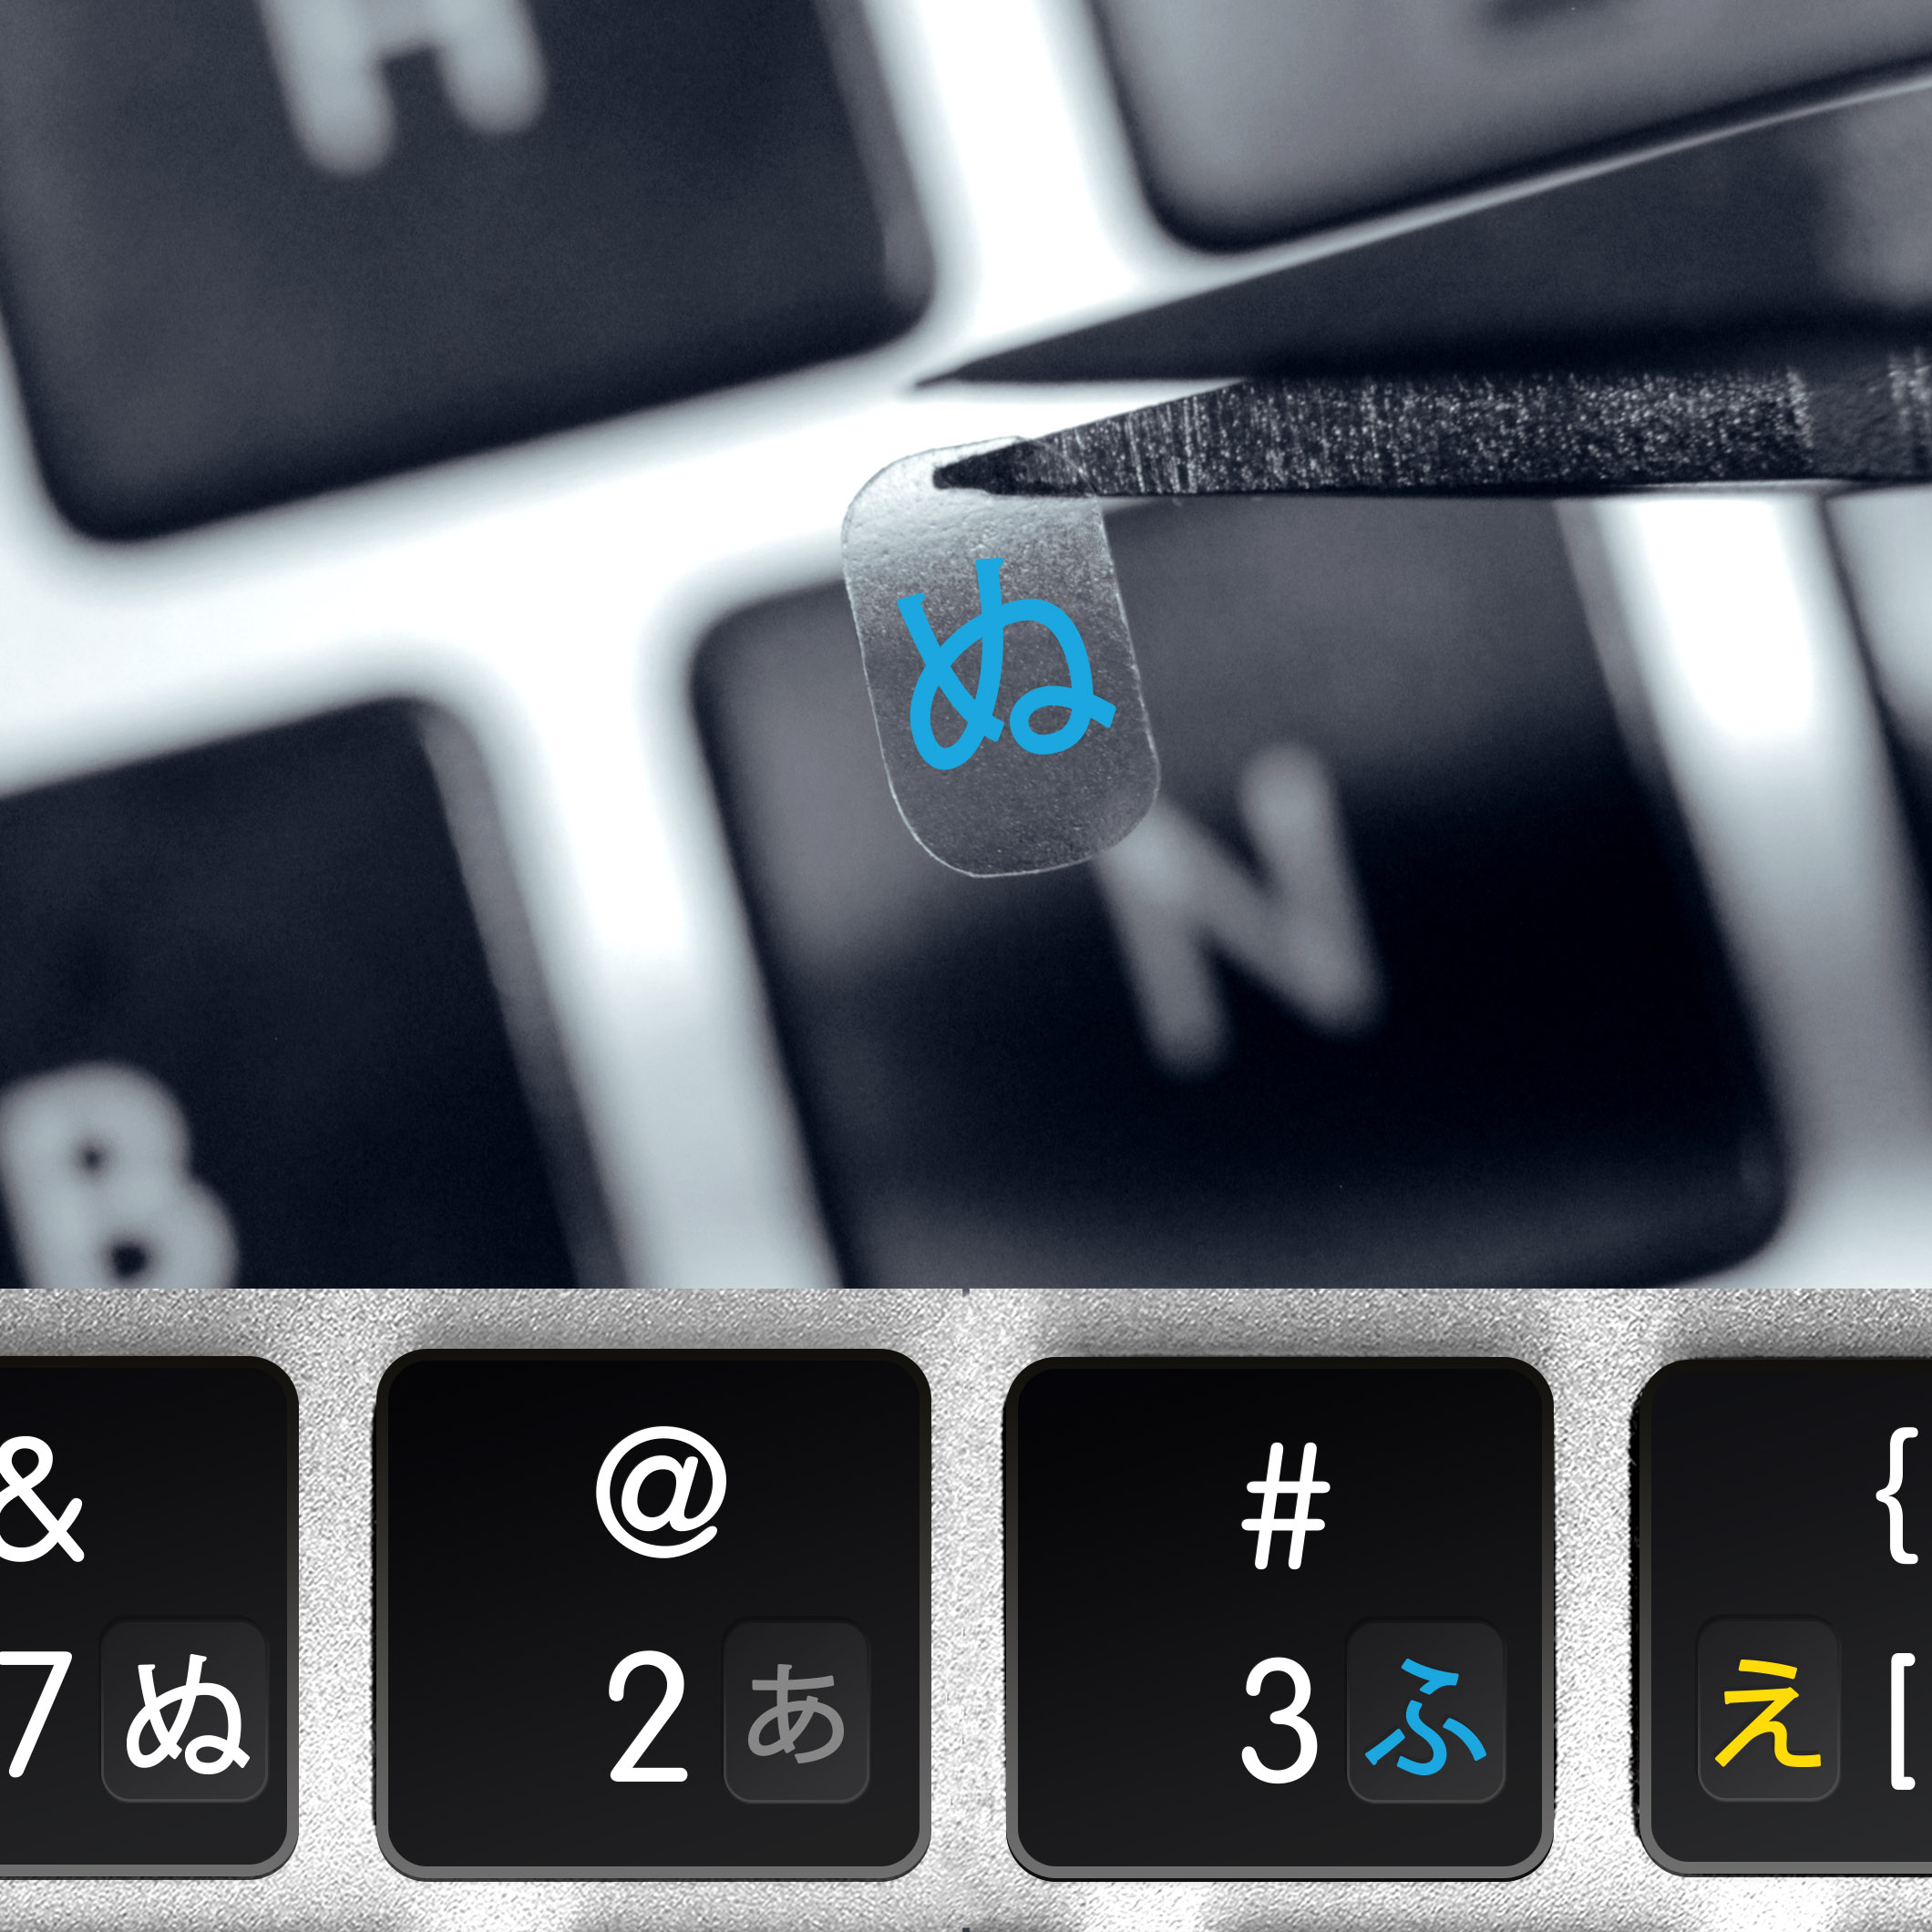 Japanese Keyboard Stickers Transparent w/ Blue Letters 